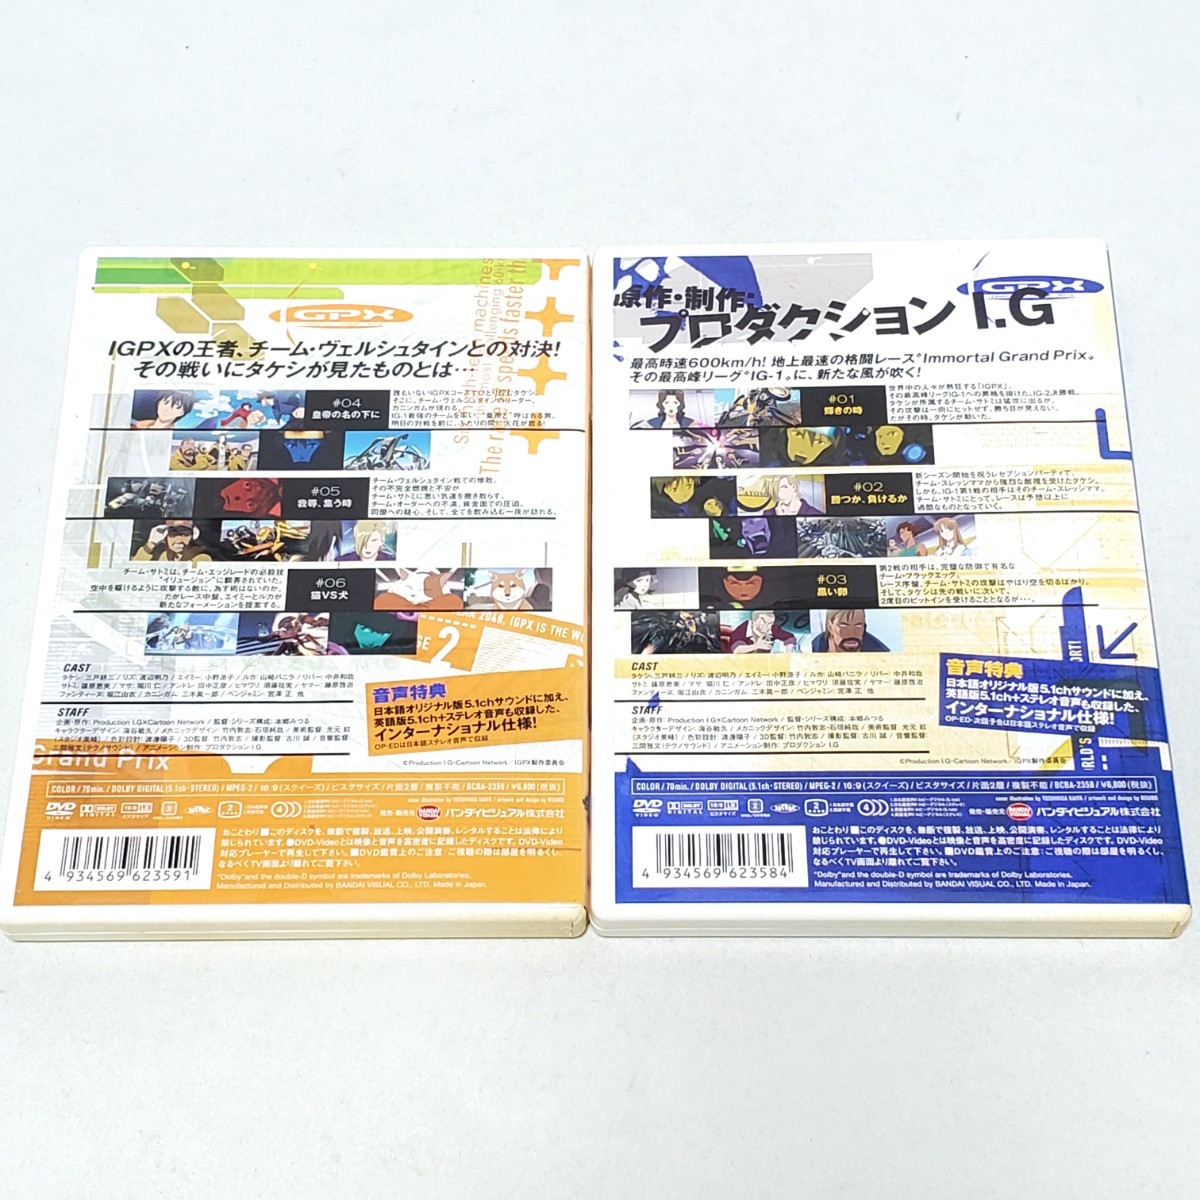 【DVD】IGPX STAGE1 + STAGE2（第1話～第6話） 2本セット ユーズド品の画像2